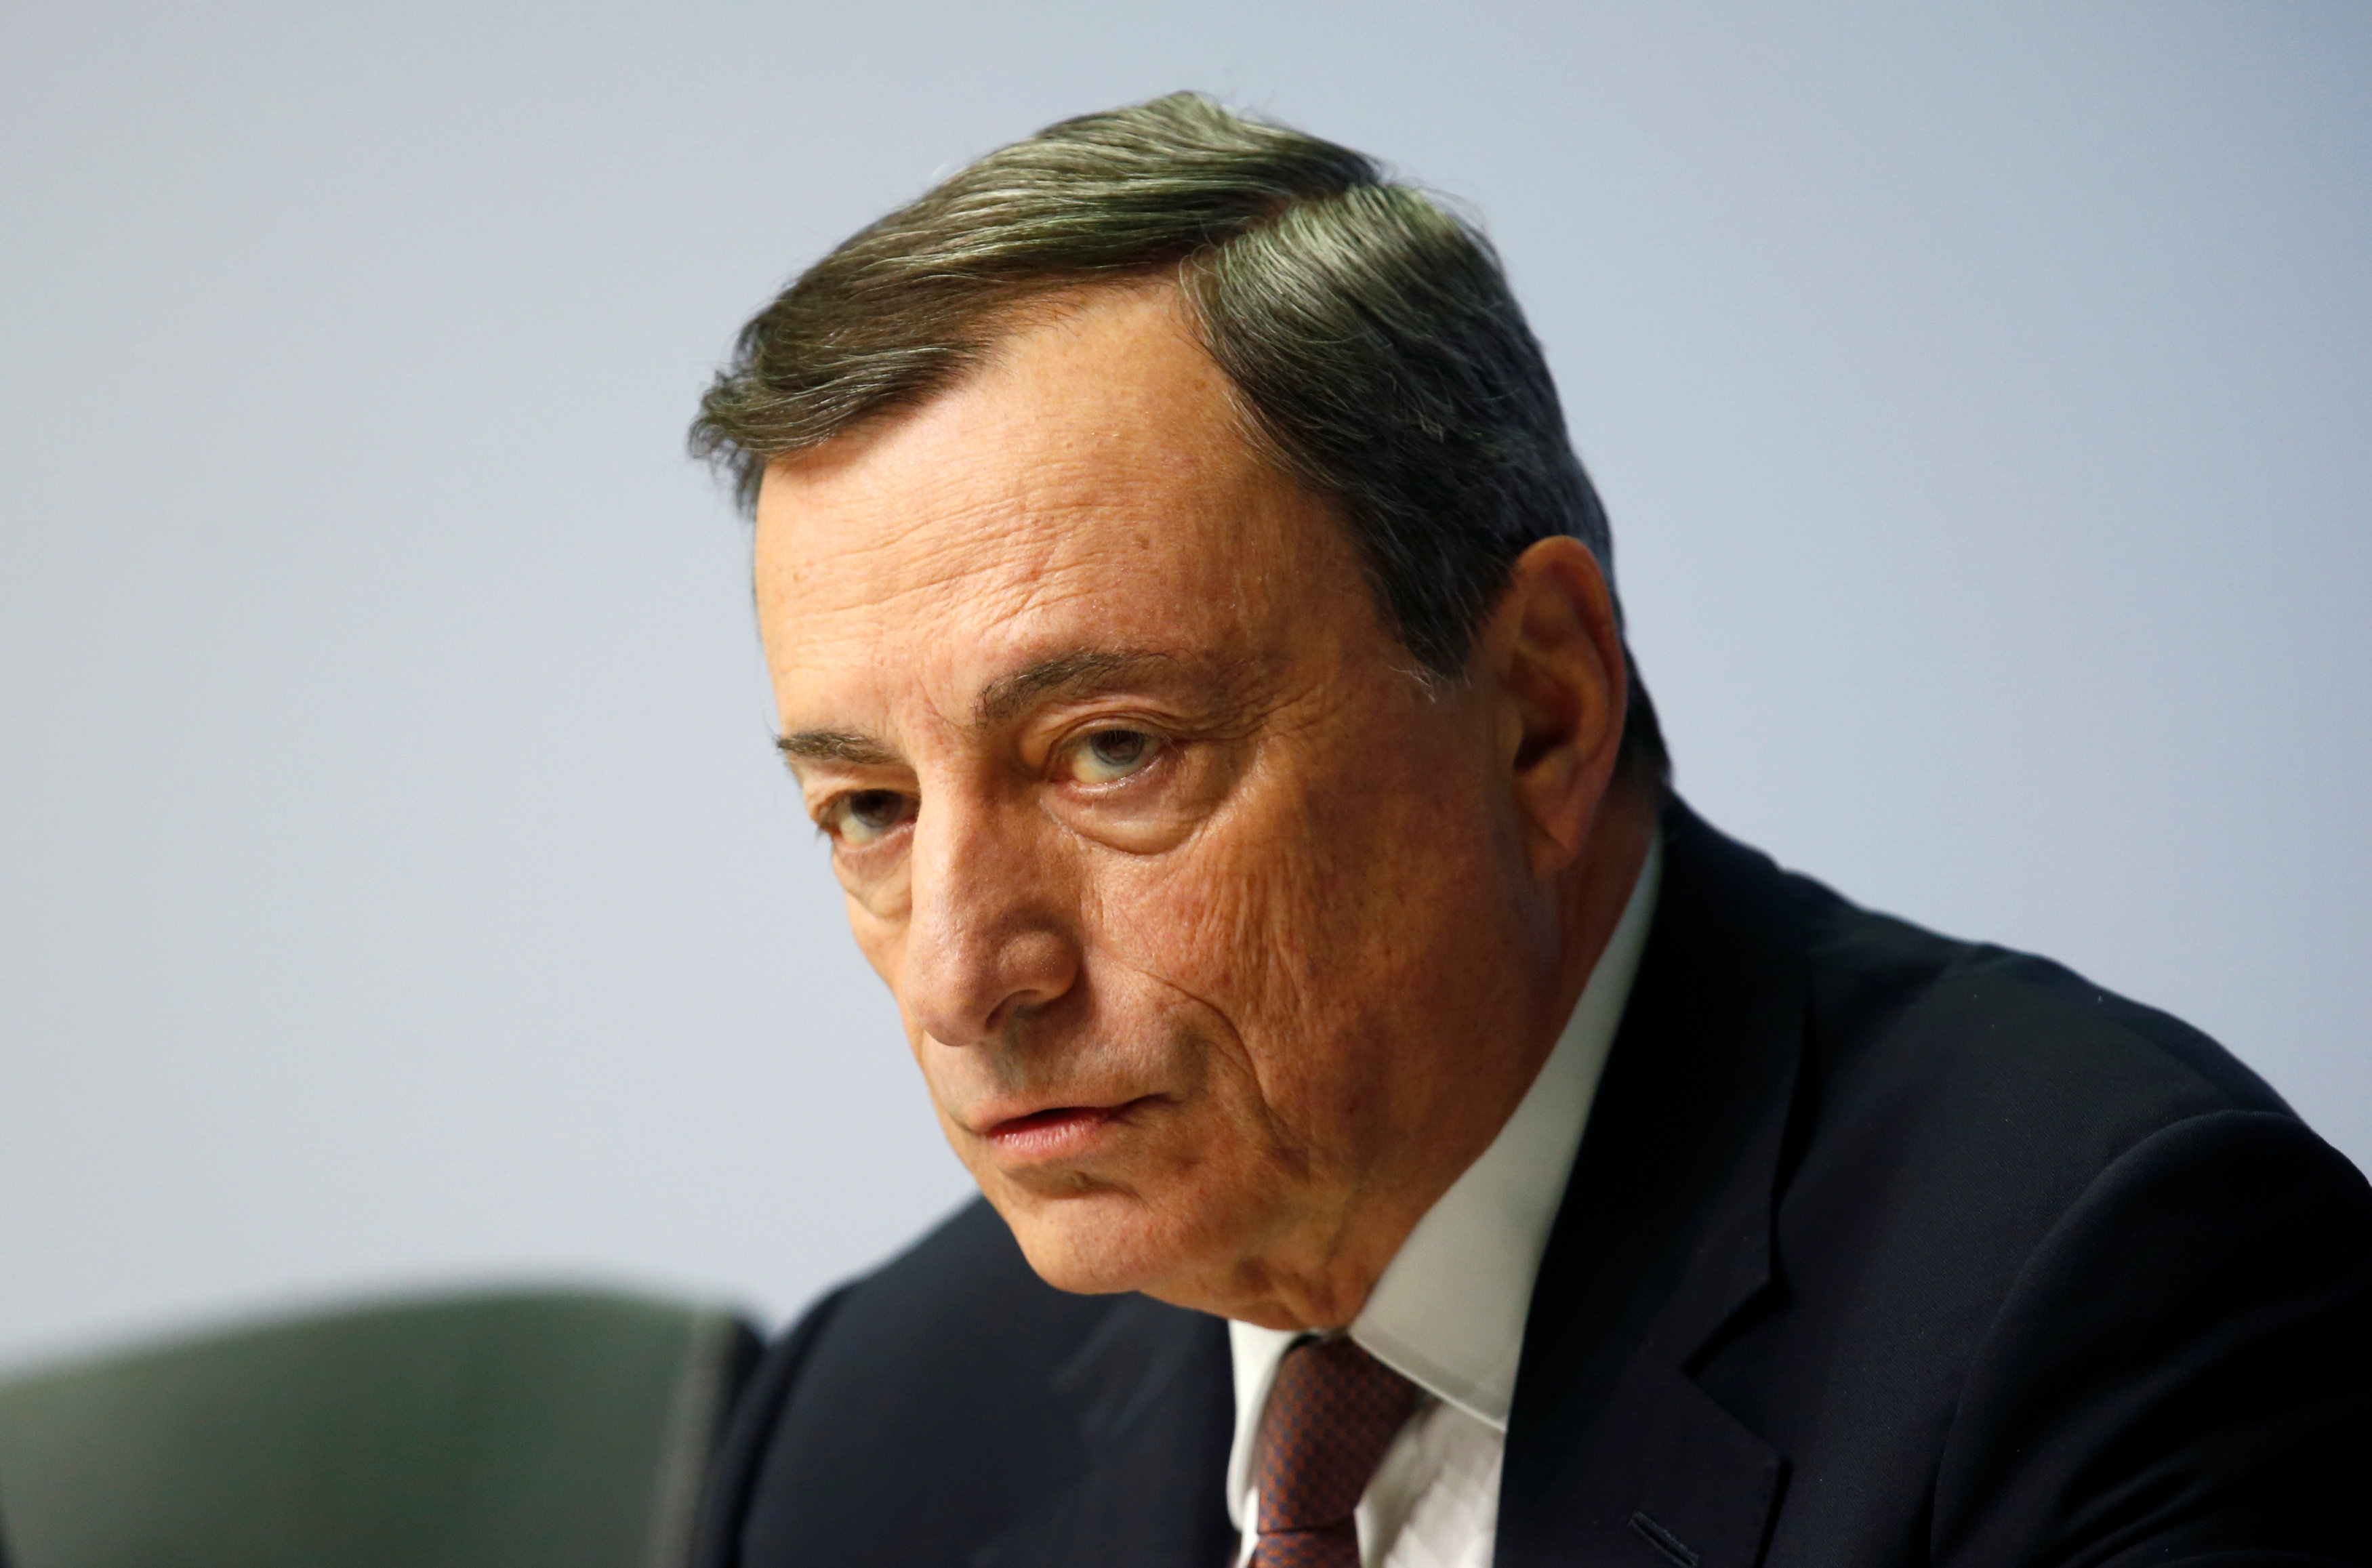 Draghi: Up to Greece to decide if it wants a fourth bailout